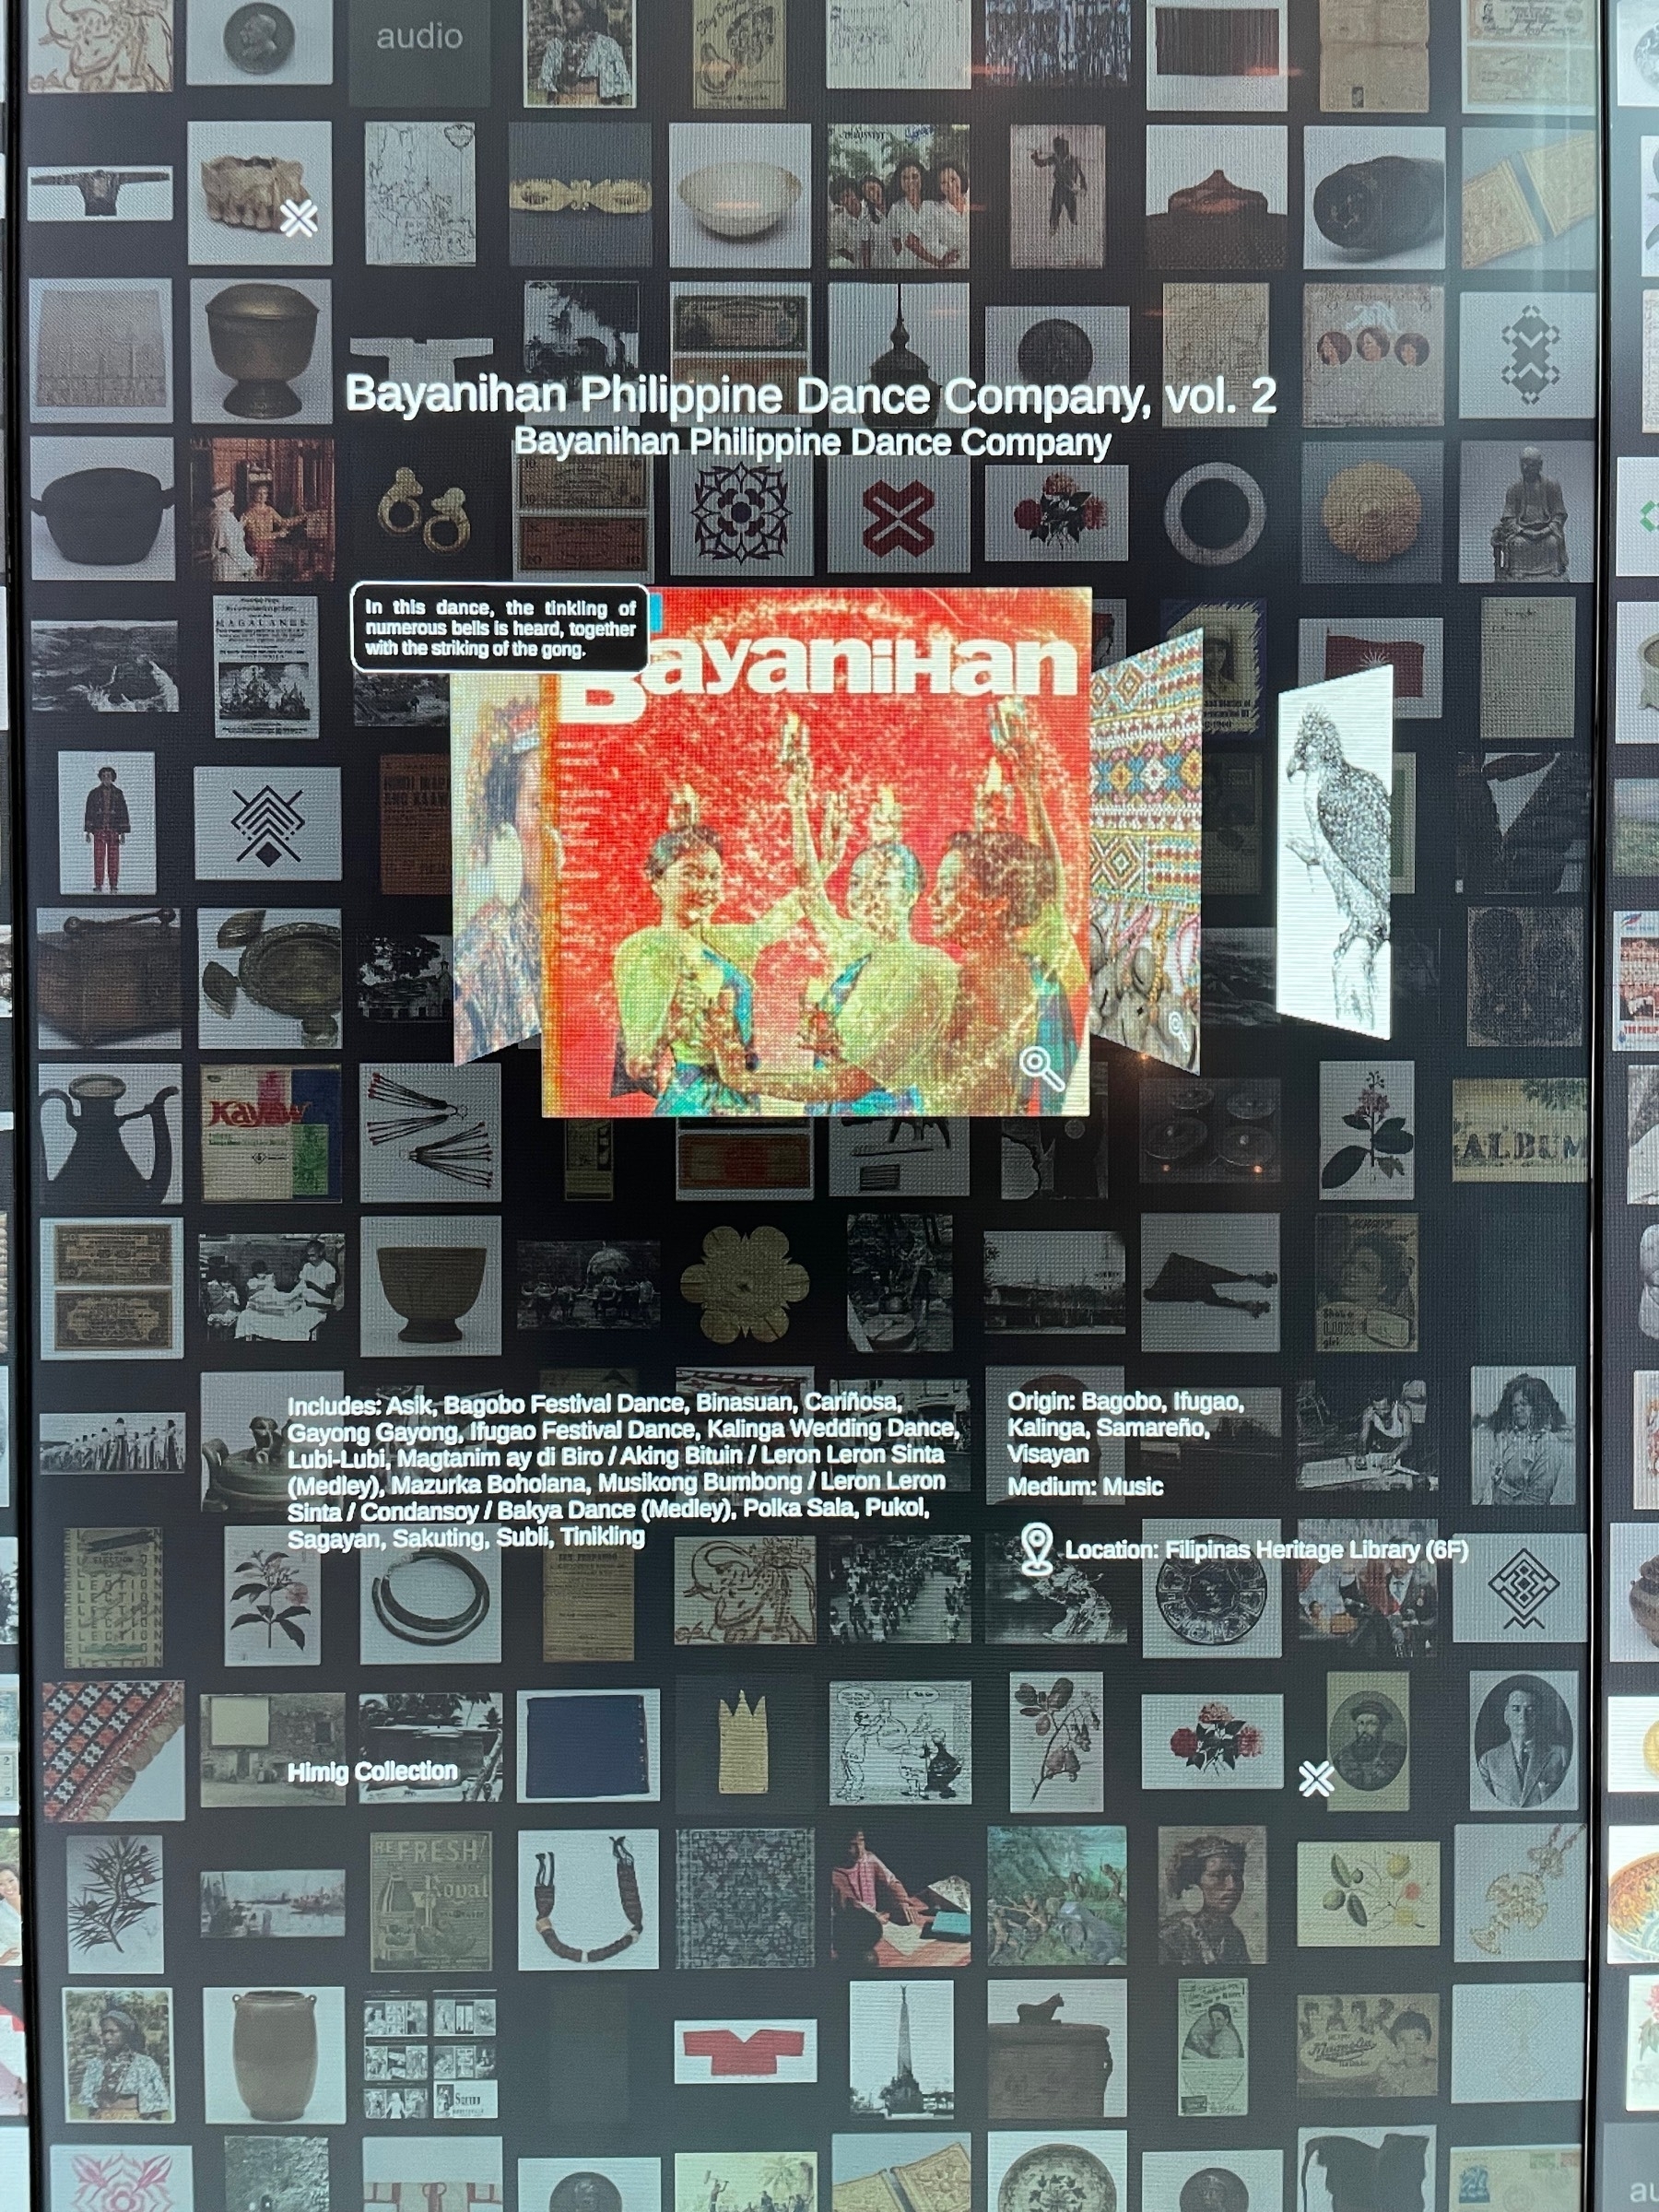 Digital interface at the Ayala Museum showing a grid of the different items collected and displayed at the museum. The item currently selected is the Bayanihan Philippine Dance Company, vol. 2 music CD. It is located in the Filipinas Heritage Library at the 6th floor as part of the Himig Collection.